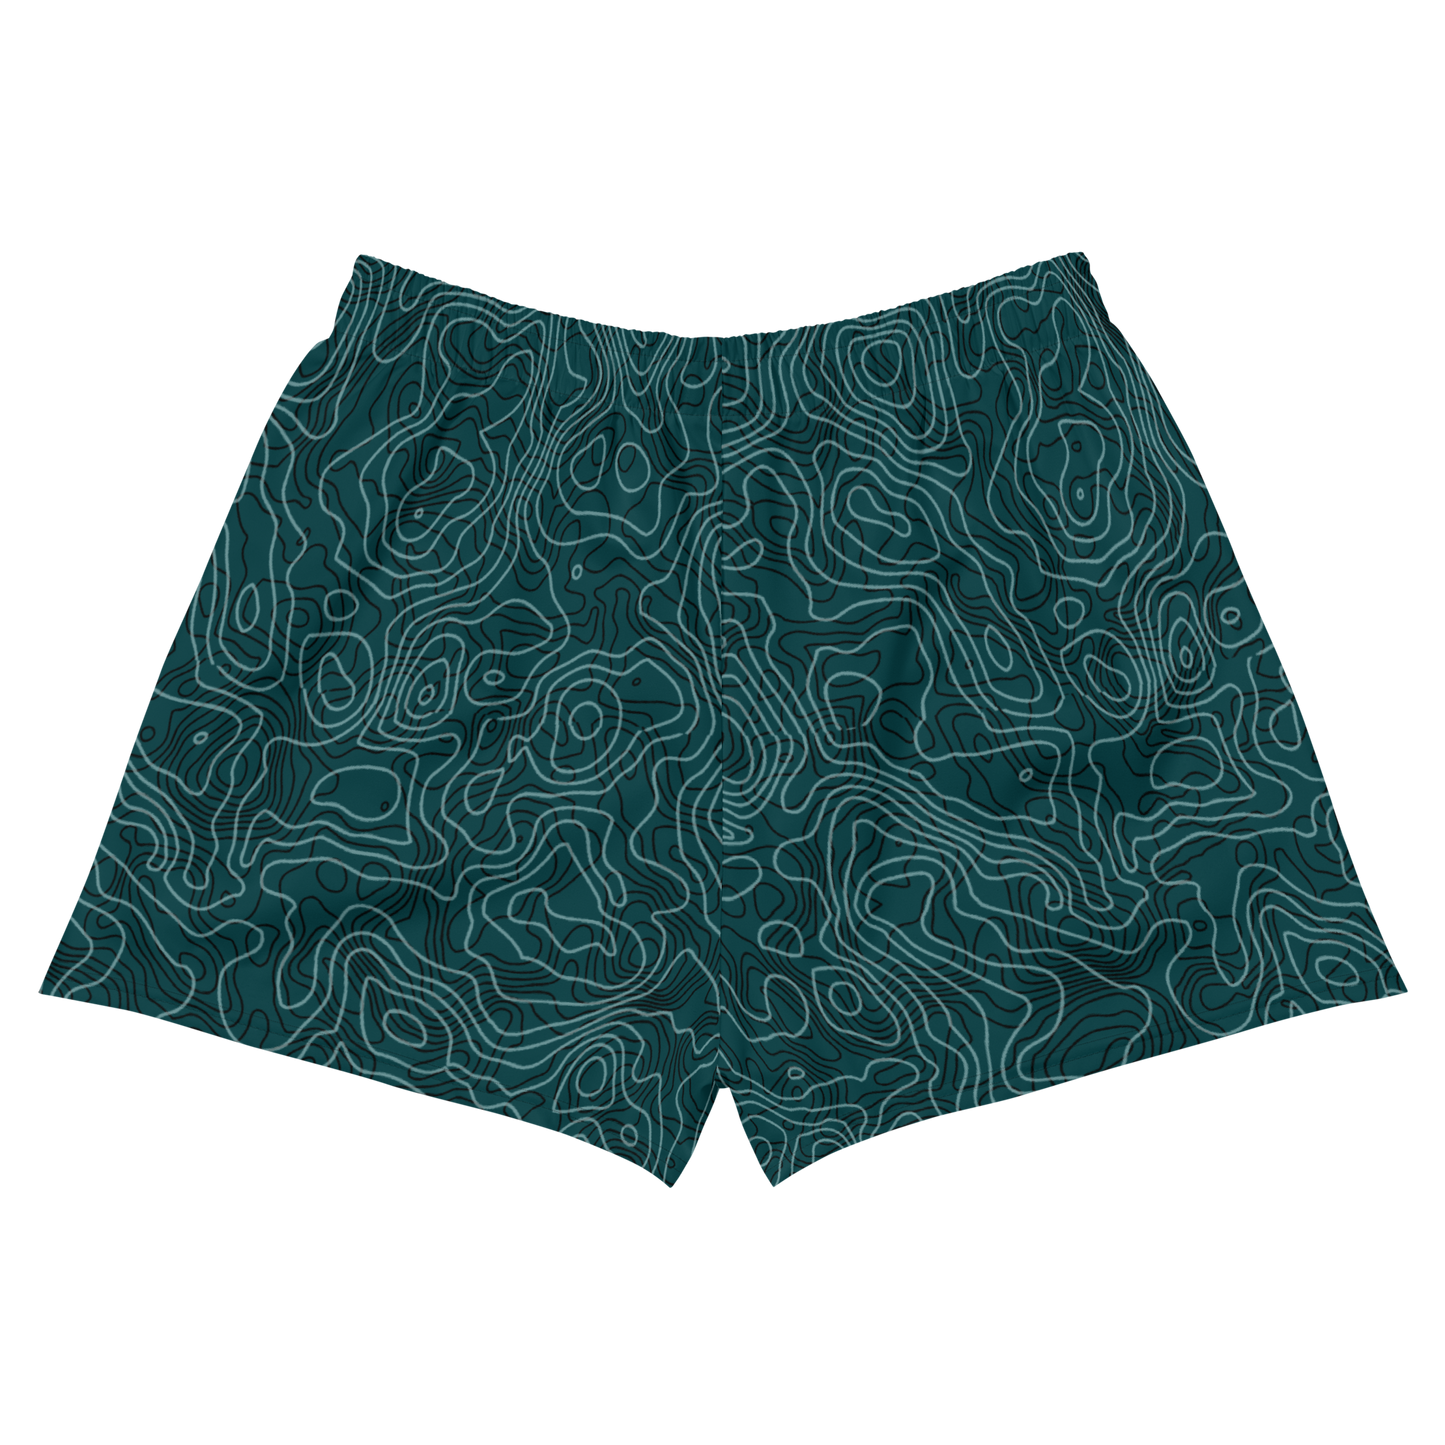 Women’s Topography Athletic Shorts - Teal